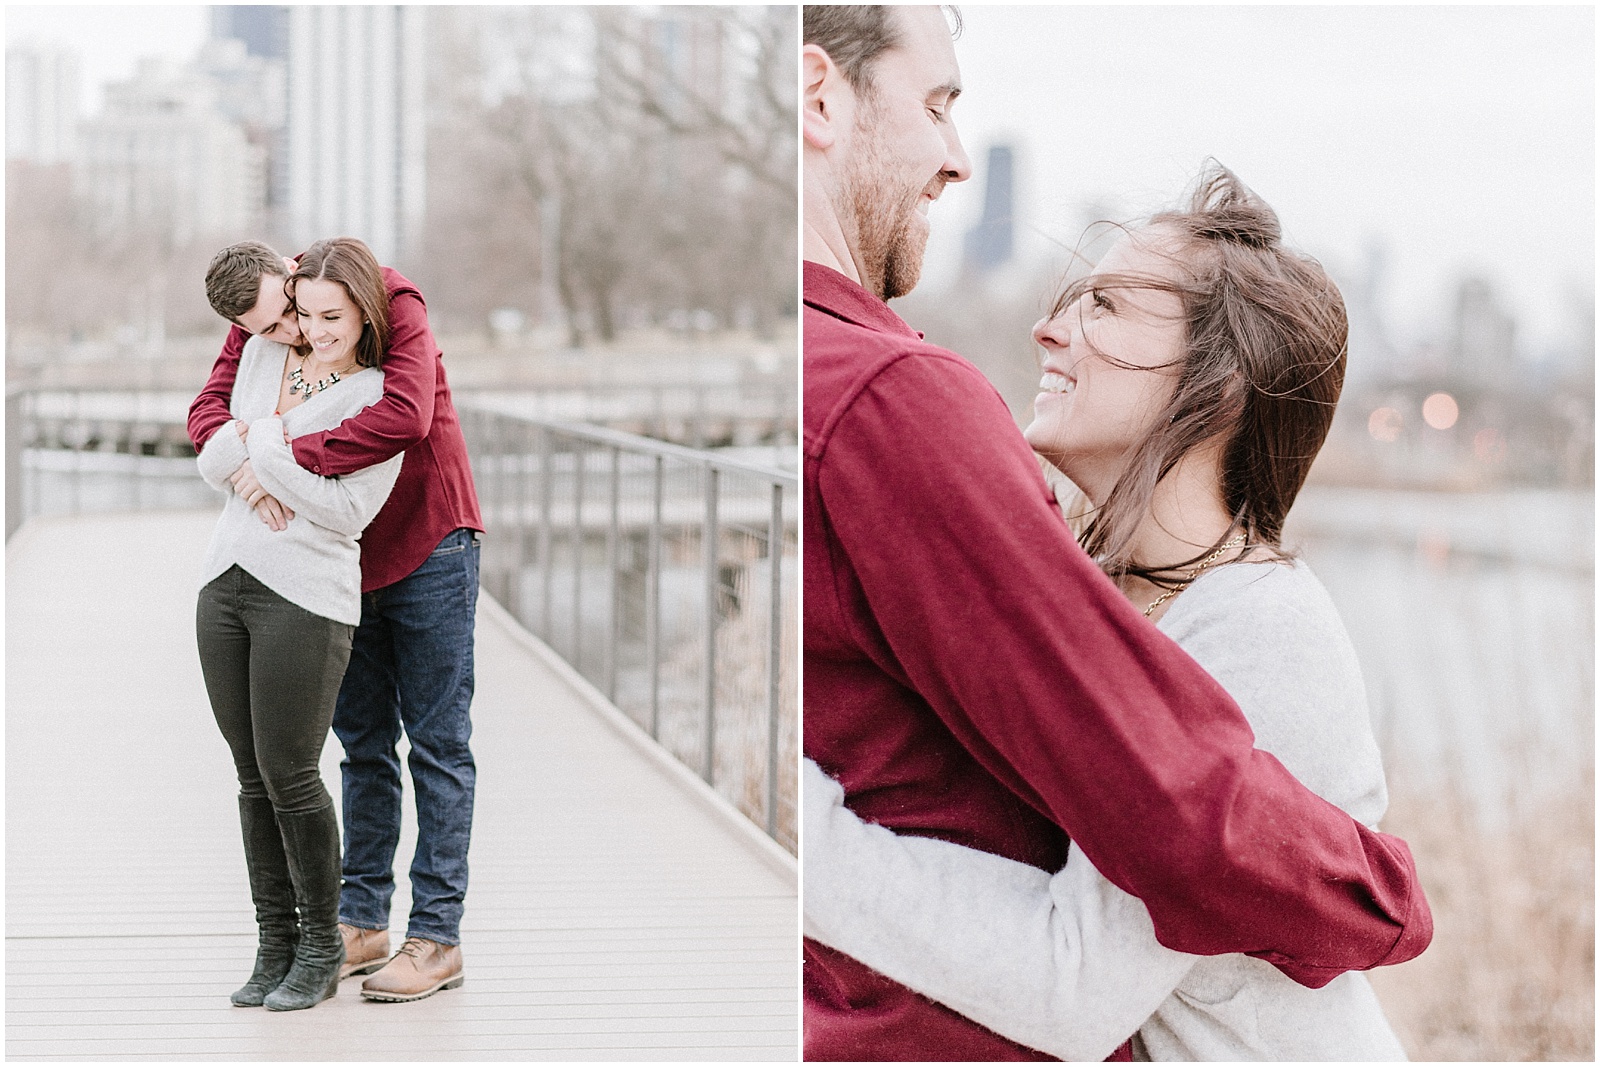 outdoor engagement photos in the winter